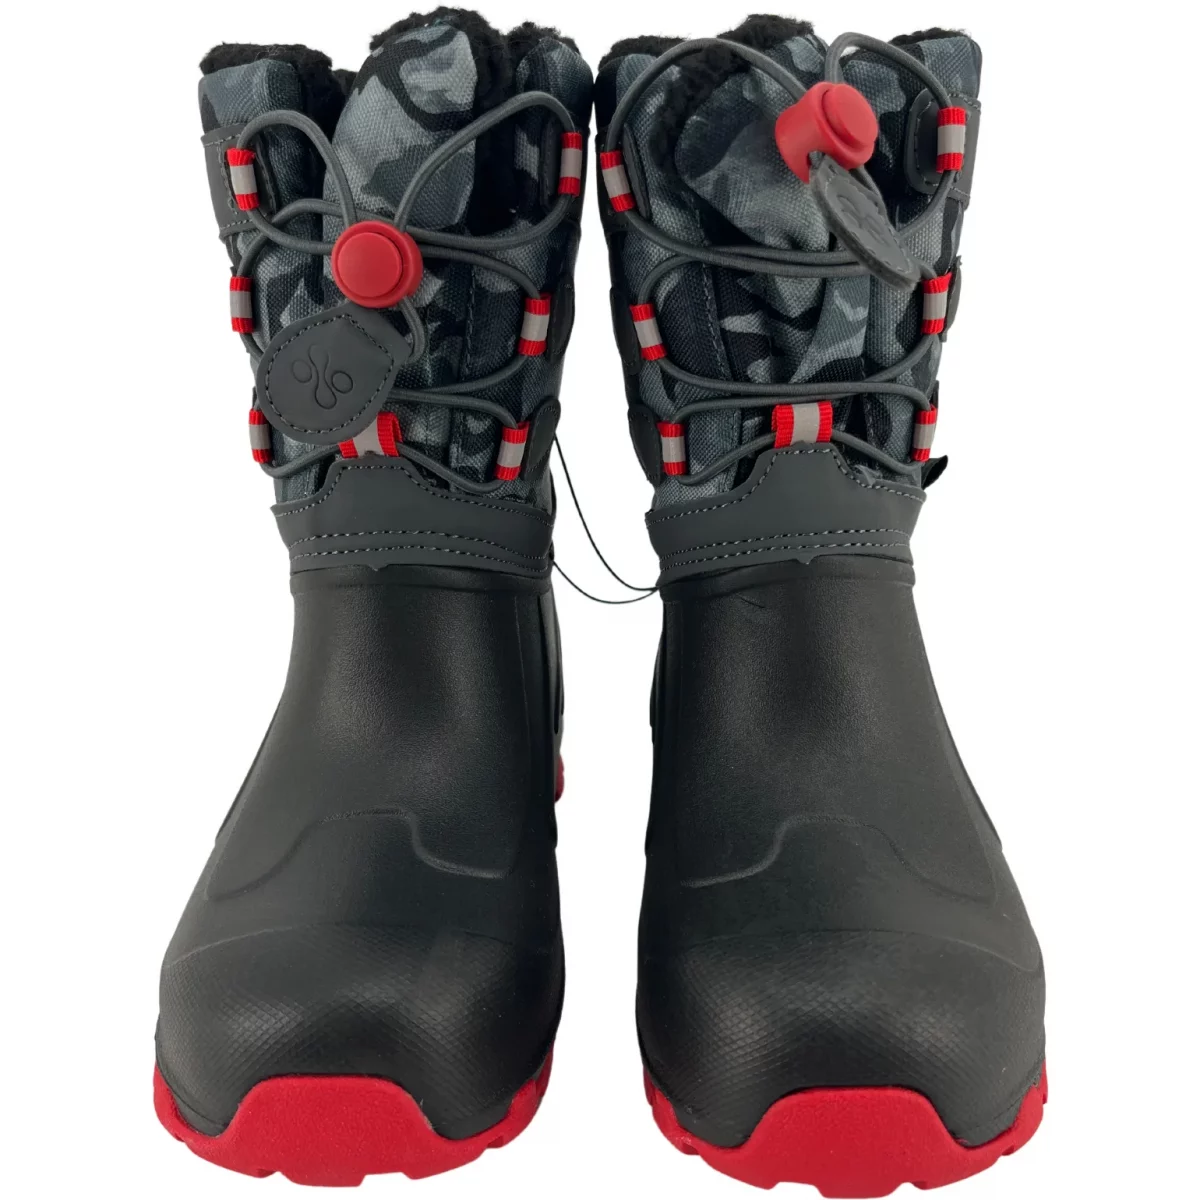 XMTN Children's Winter Boots / Snow Boots / Black & Red / Various Sizes